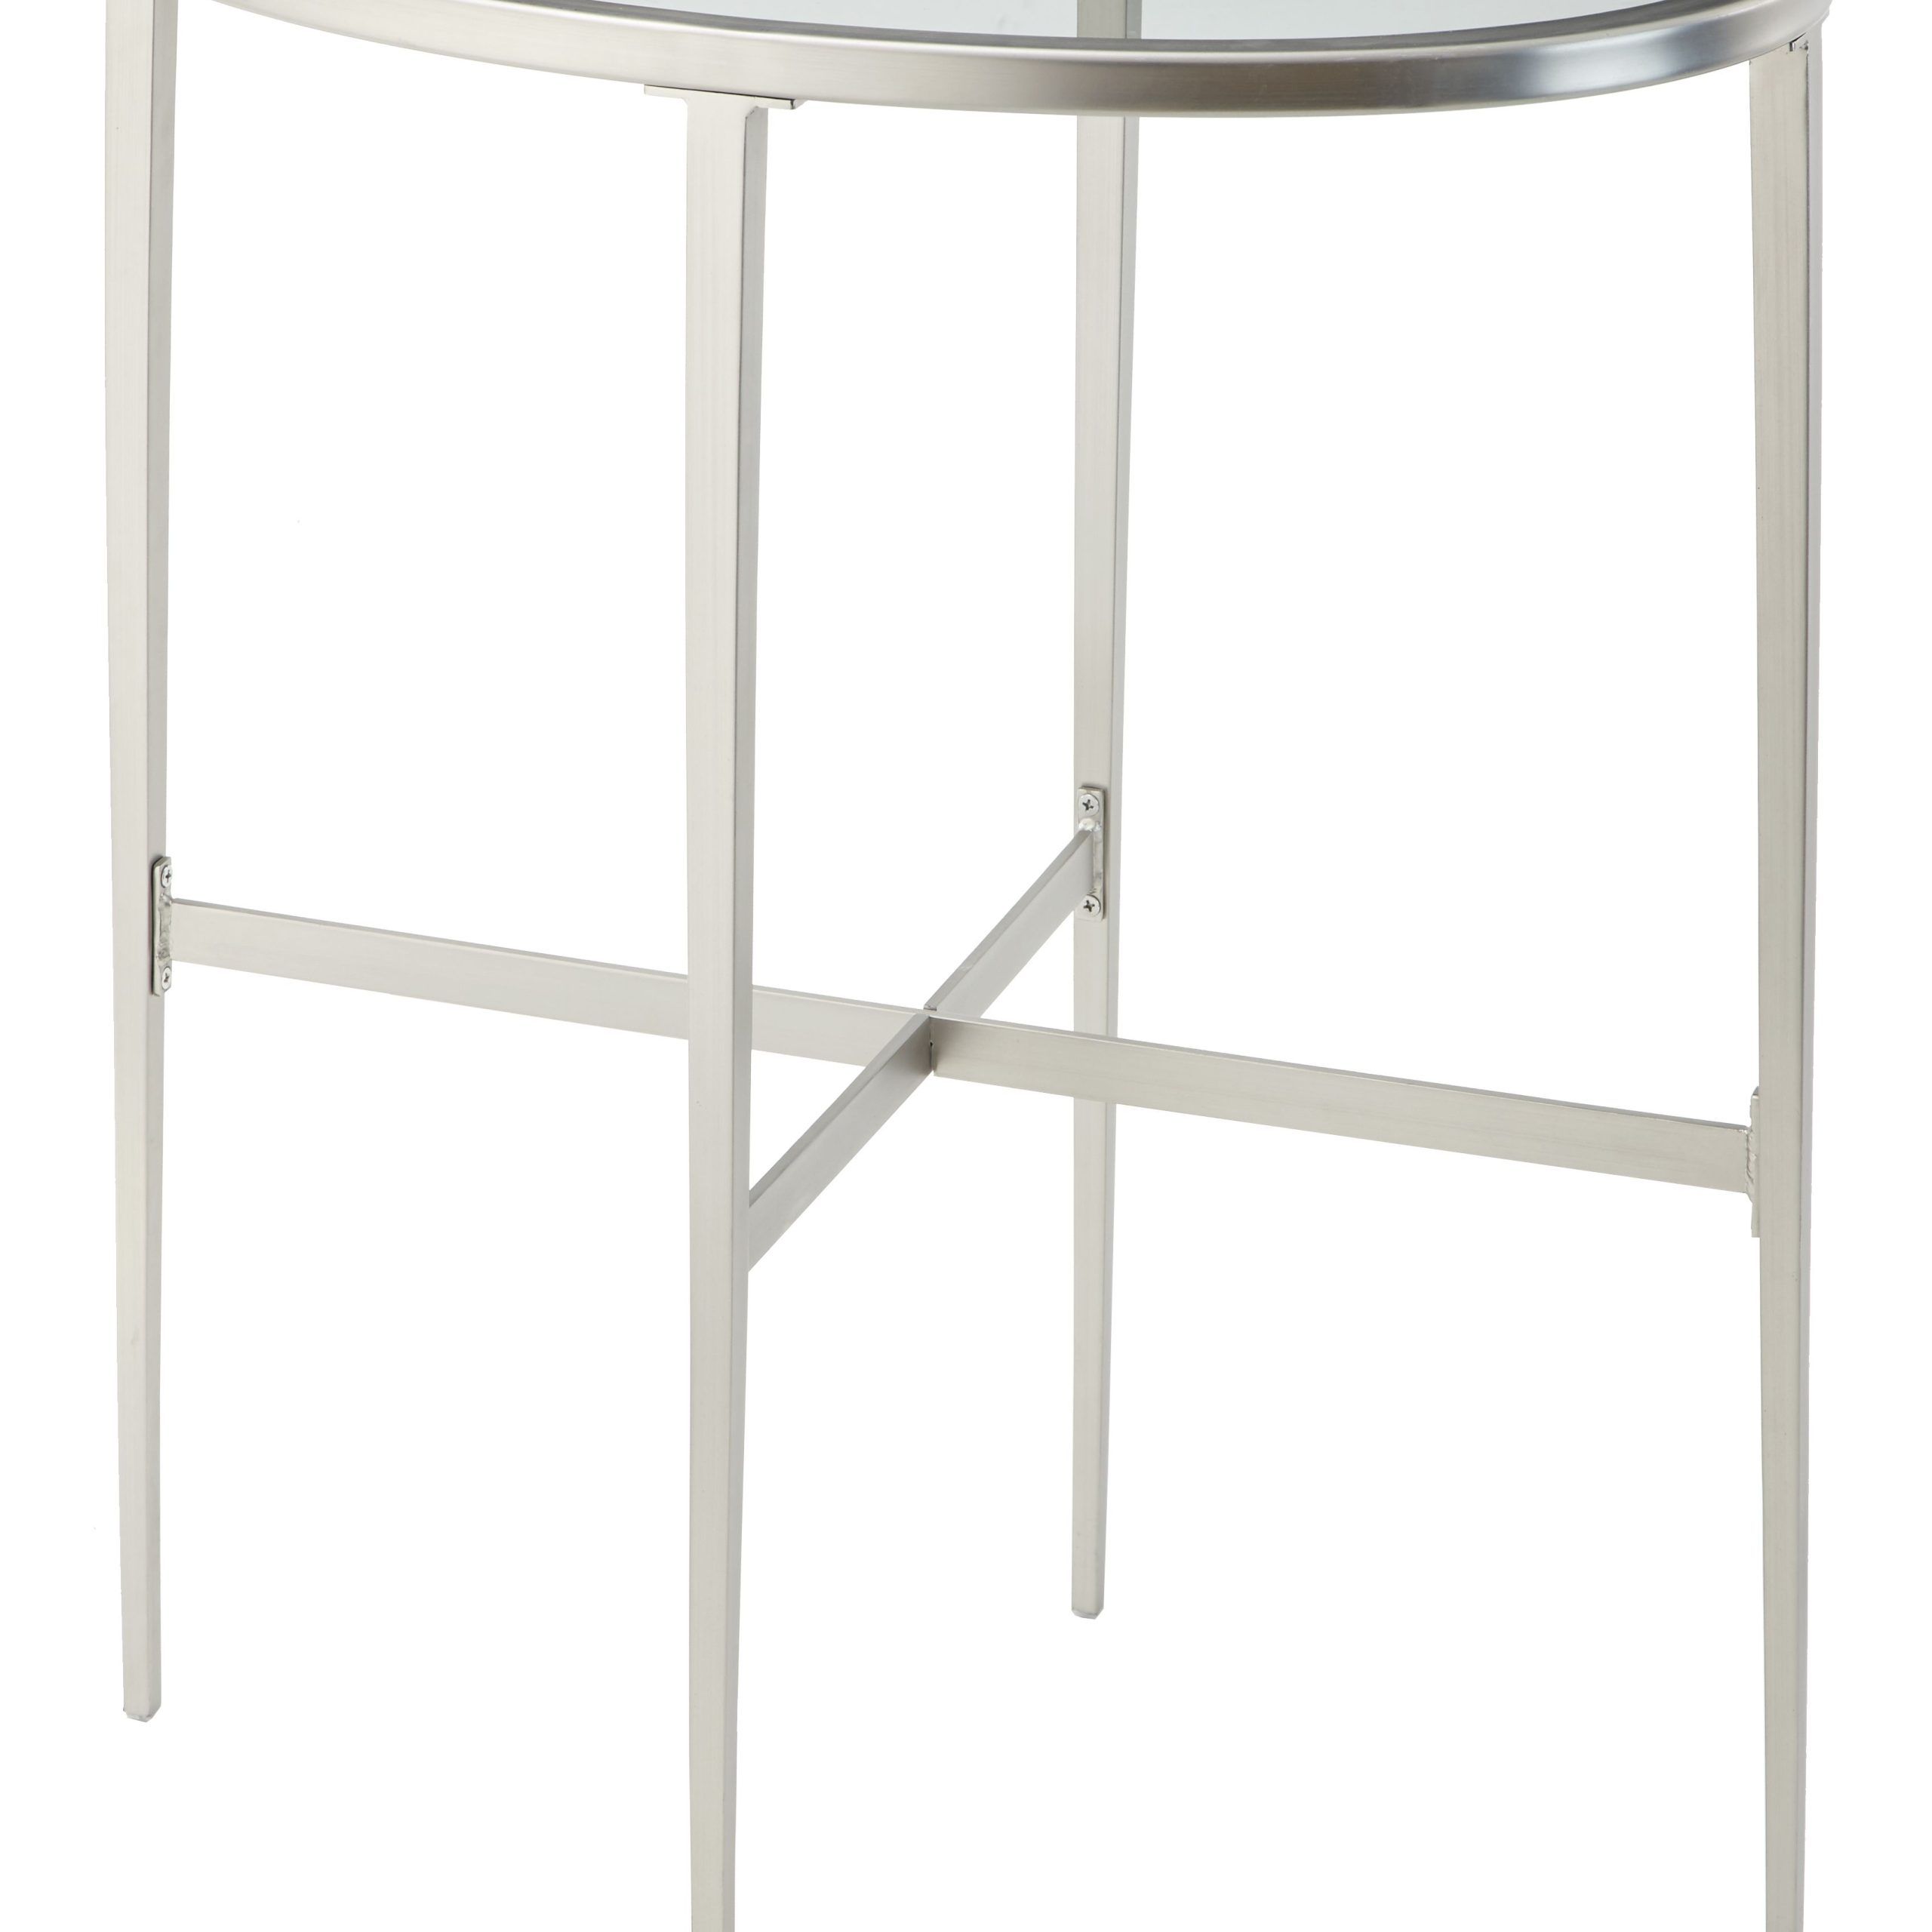 Verne Oval Side Table, Brushed Nickel Frame. Tempered Tinted Glass Top Pertaining To Tempered Glass Oval Side Tables (Gallery 6 of 20)